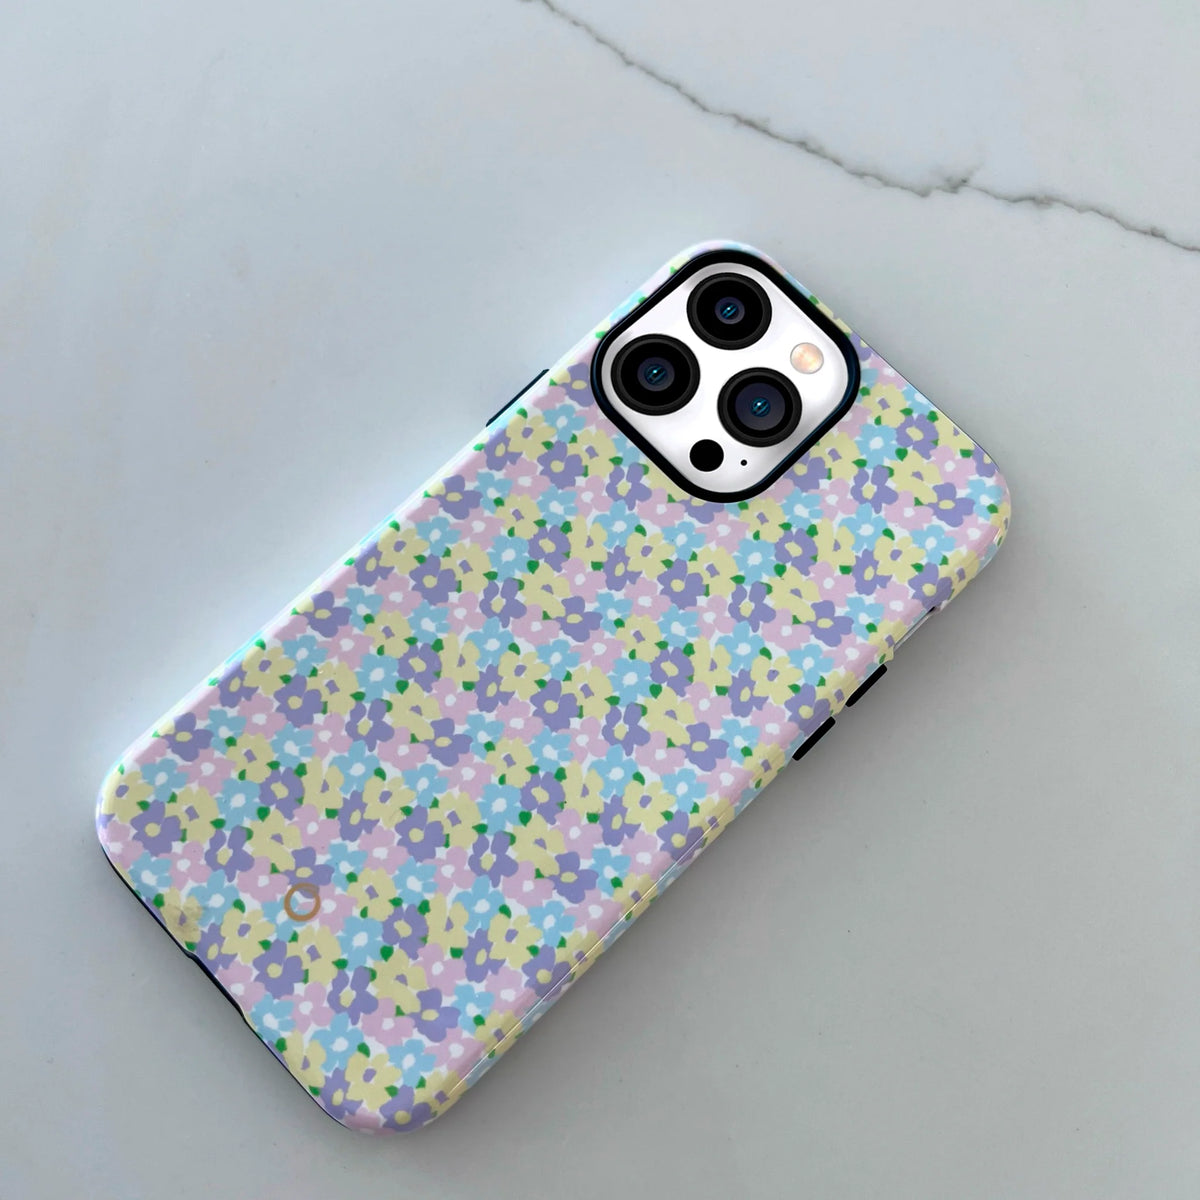 Cosmos Spring Flowers iPhone Case - iPhone 11 Pro